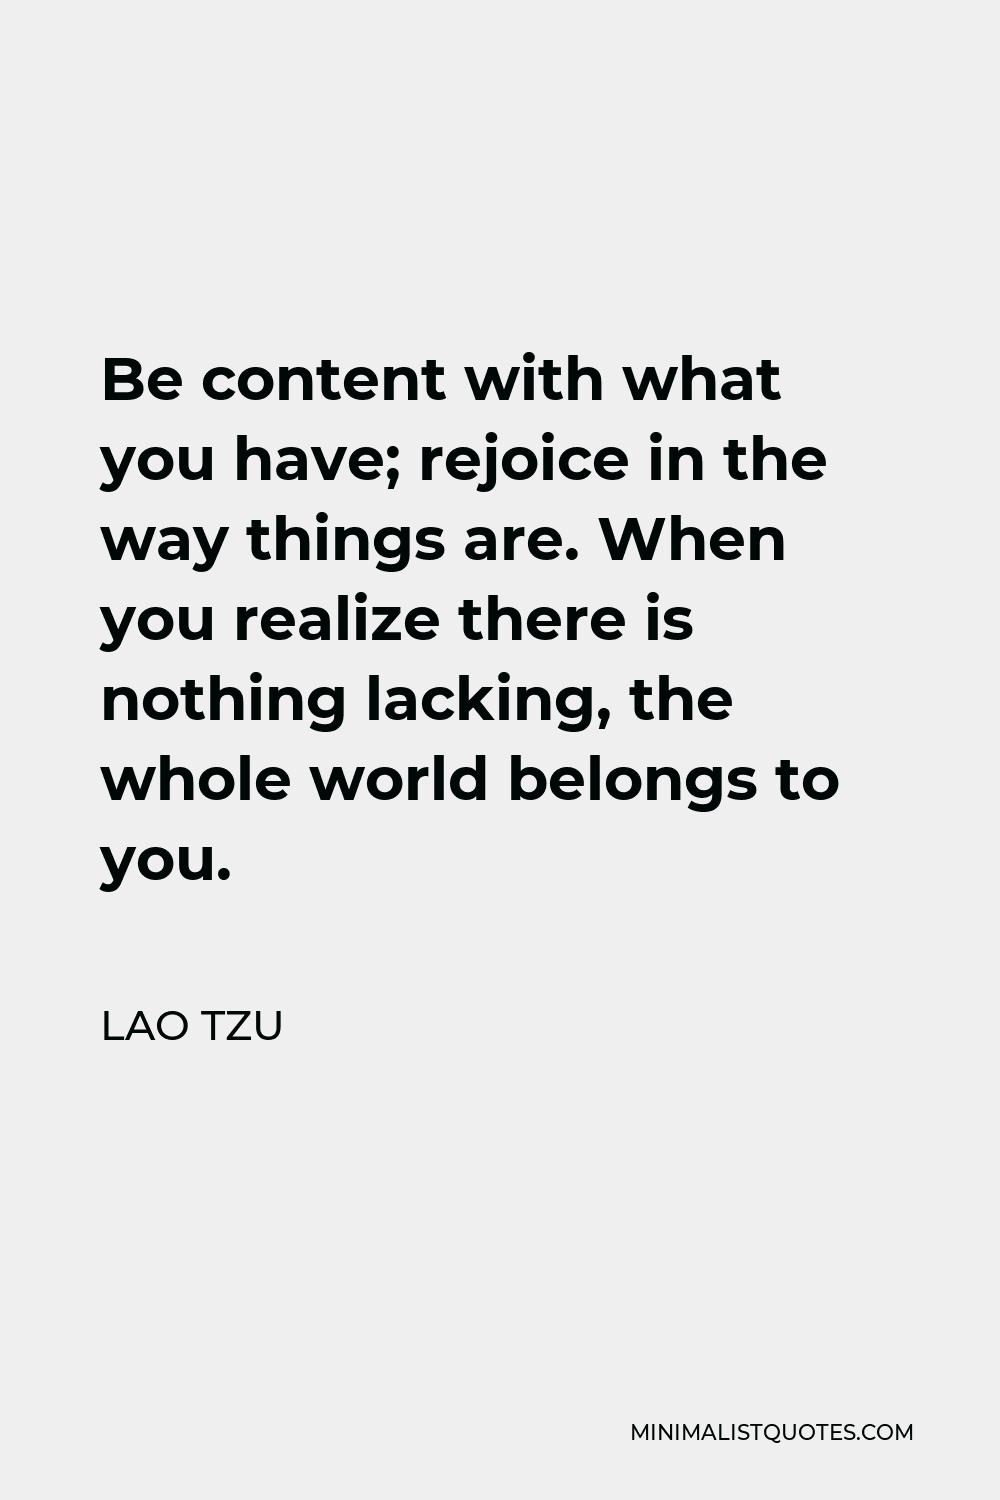 Lao Tzu Quote - Be content with what you have; rejoice in the way things are. When you realize there is nothing lacking, the whole world belongs to you.